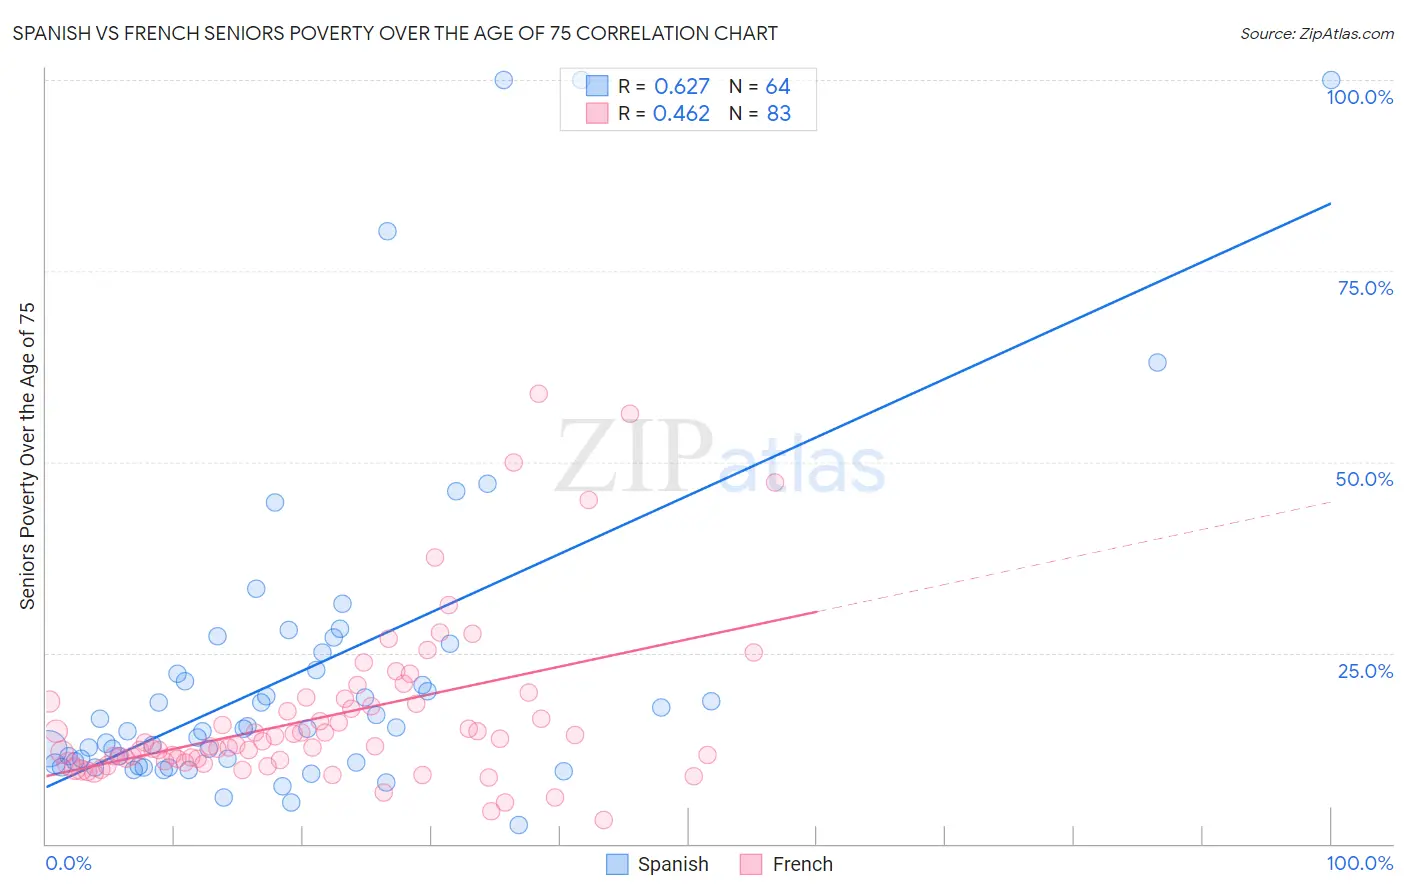 Spanish vs French Seniors Poverty Over the Age of 75